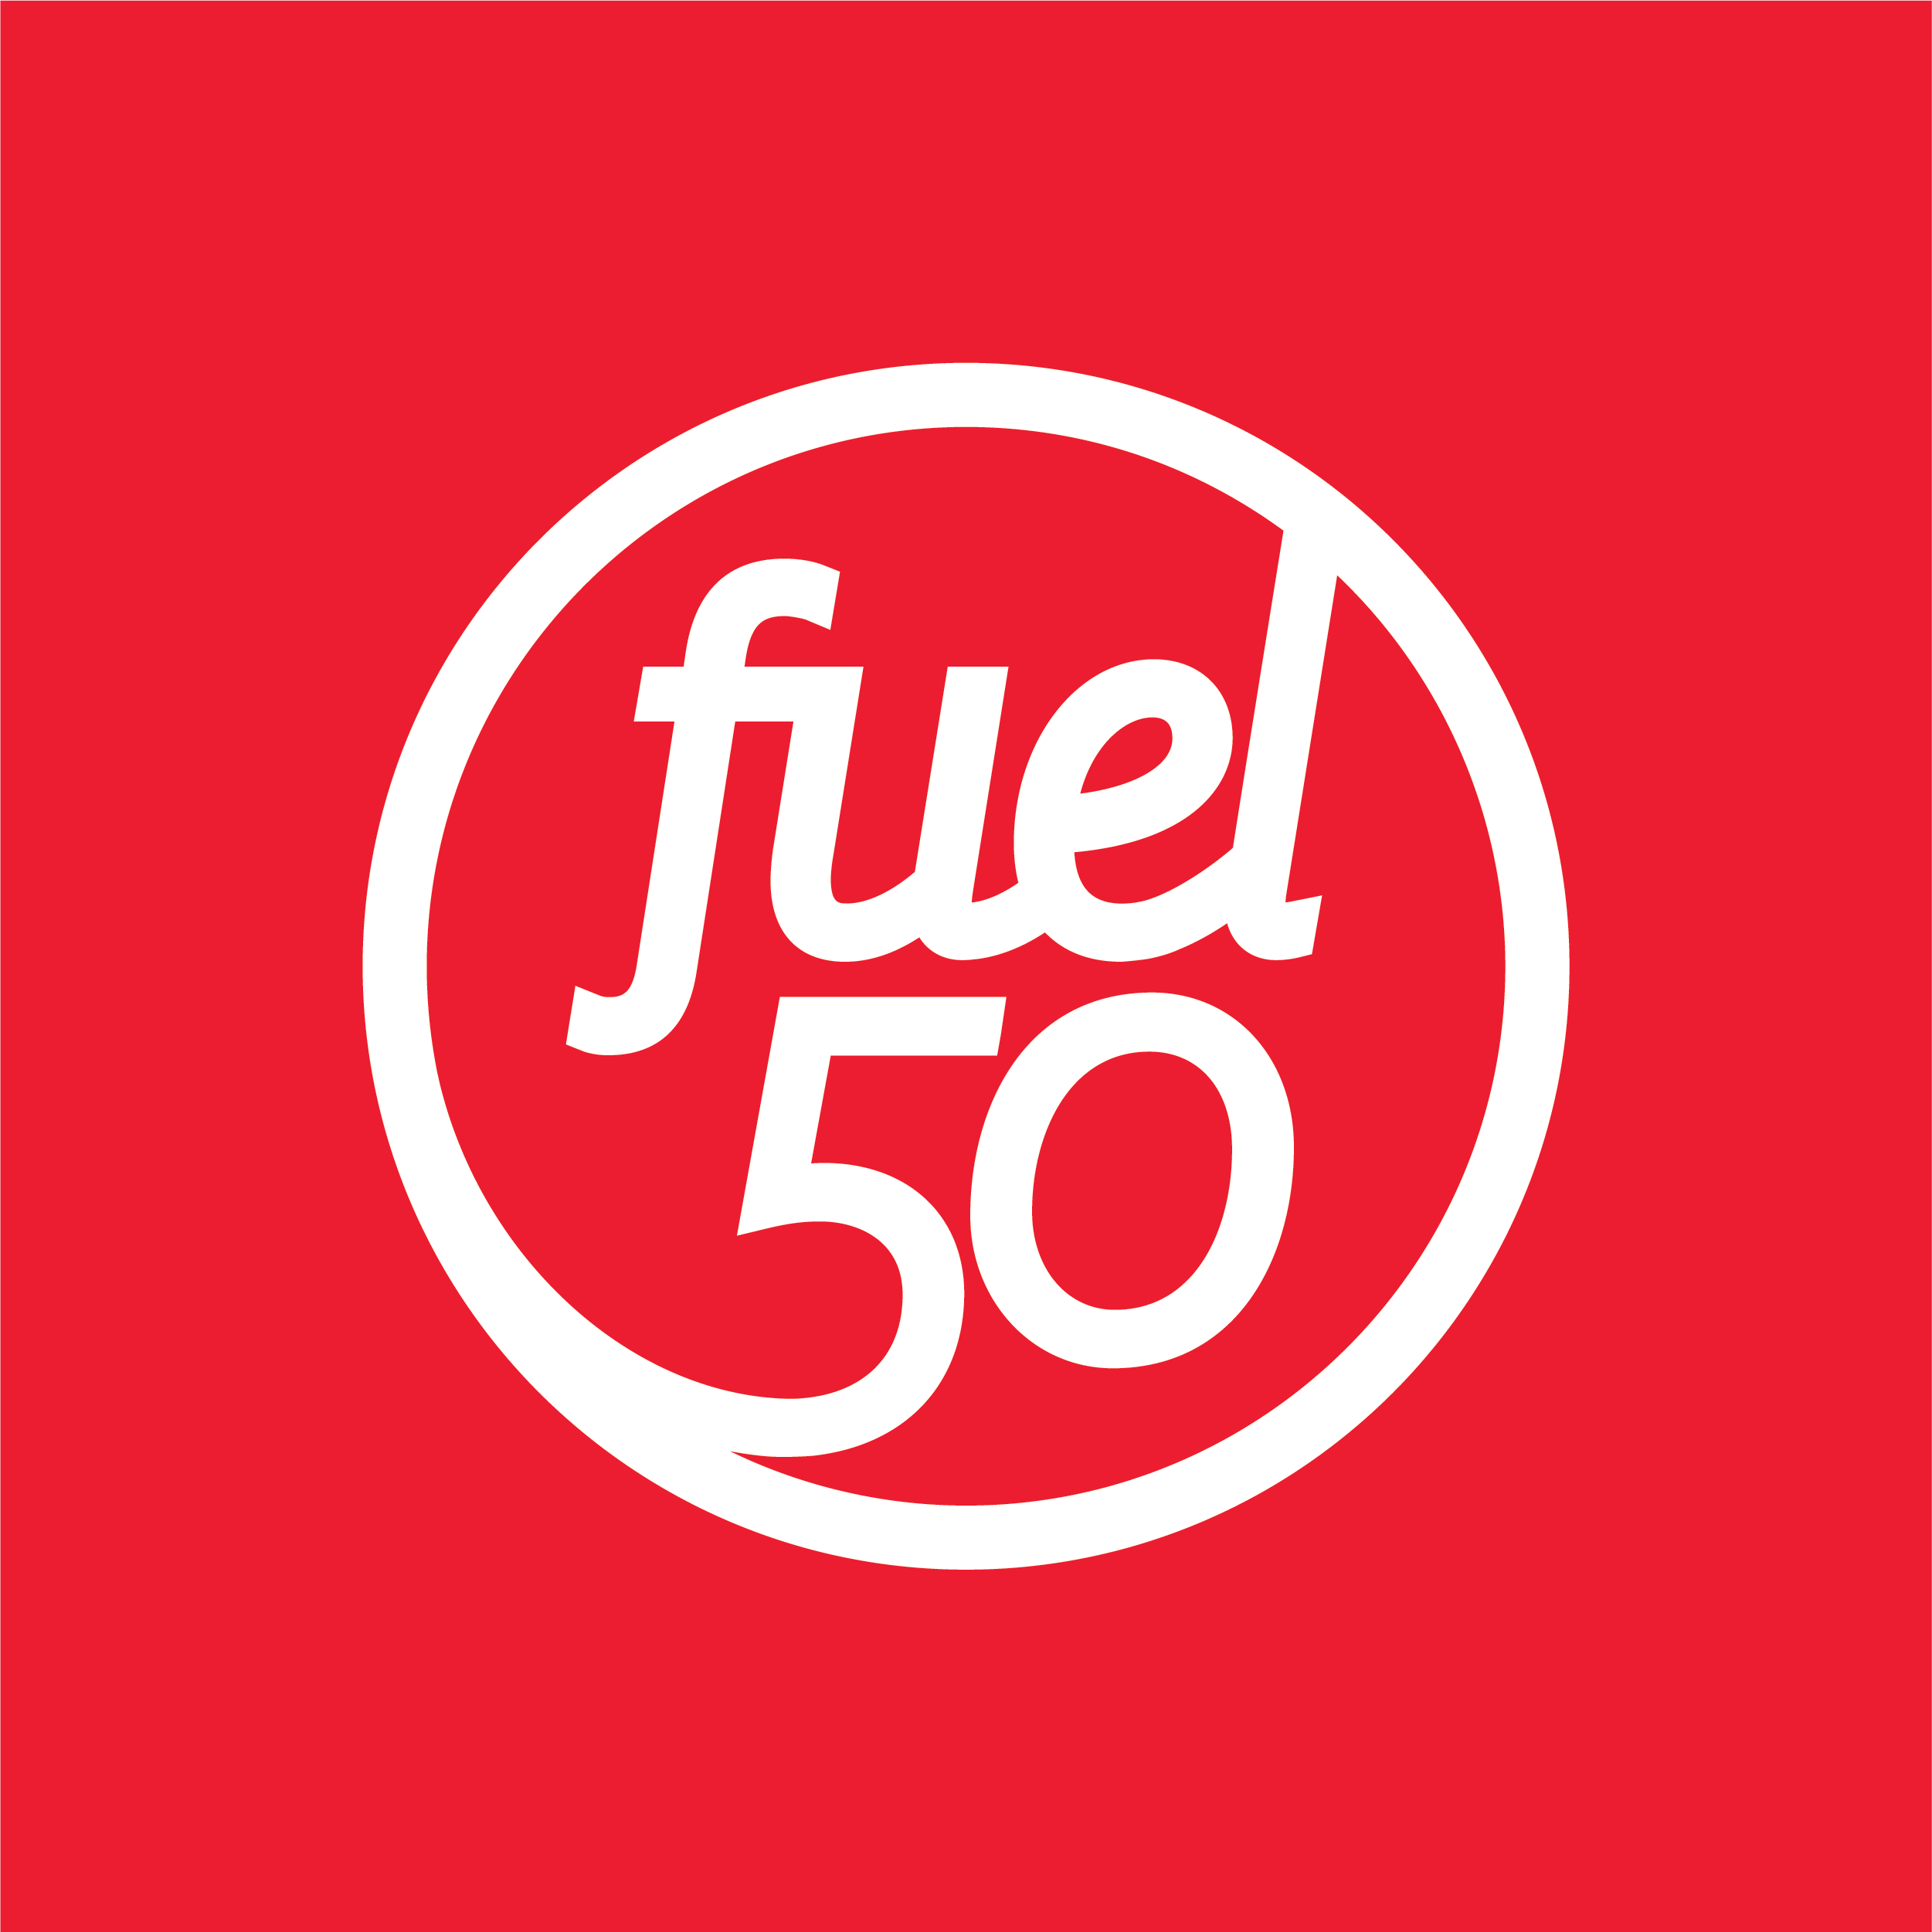 Fuel50 & Degreed Partner to Launch Learn+, a Connected Experience Driving Purposeful Growth